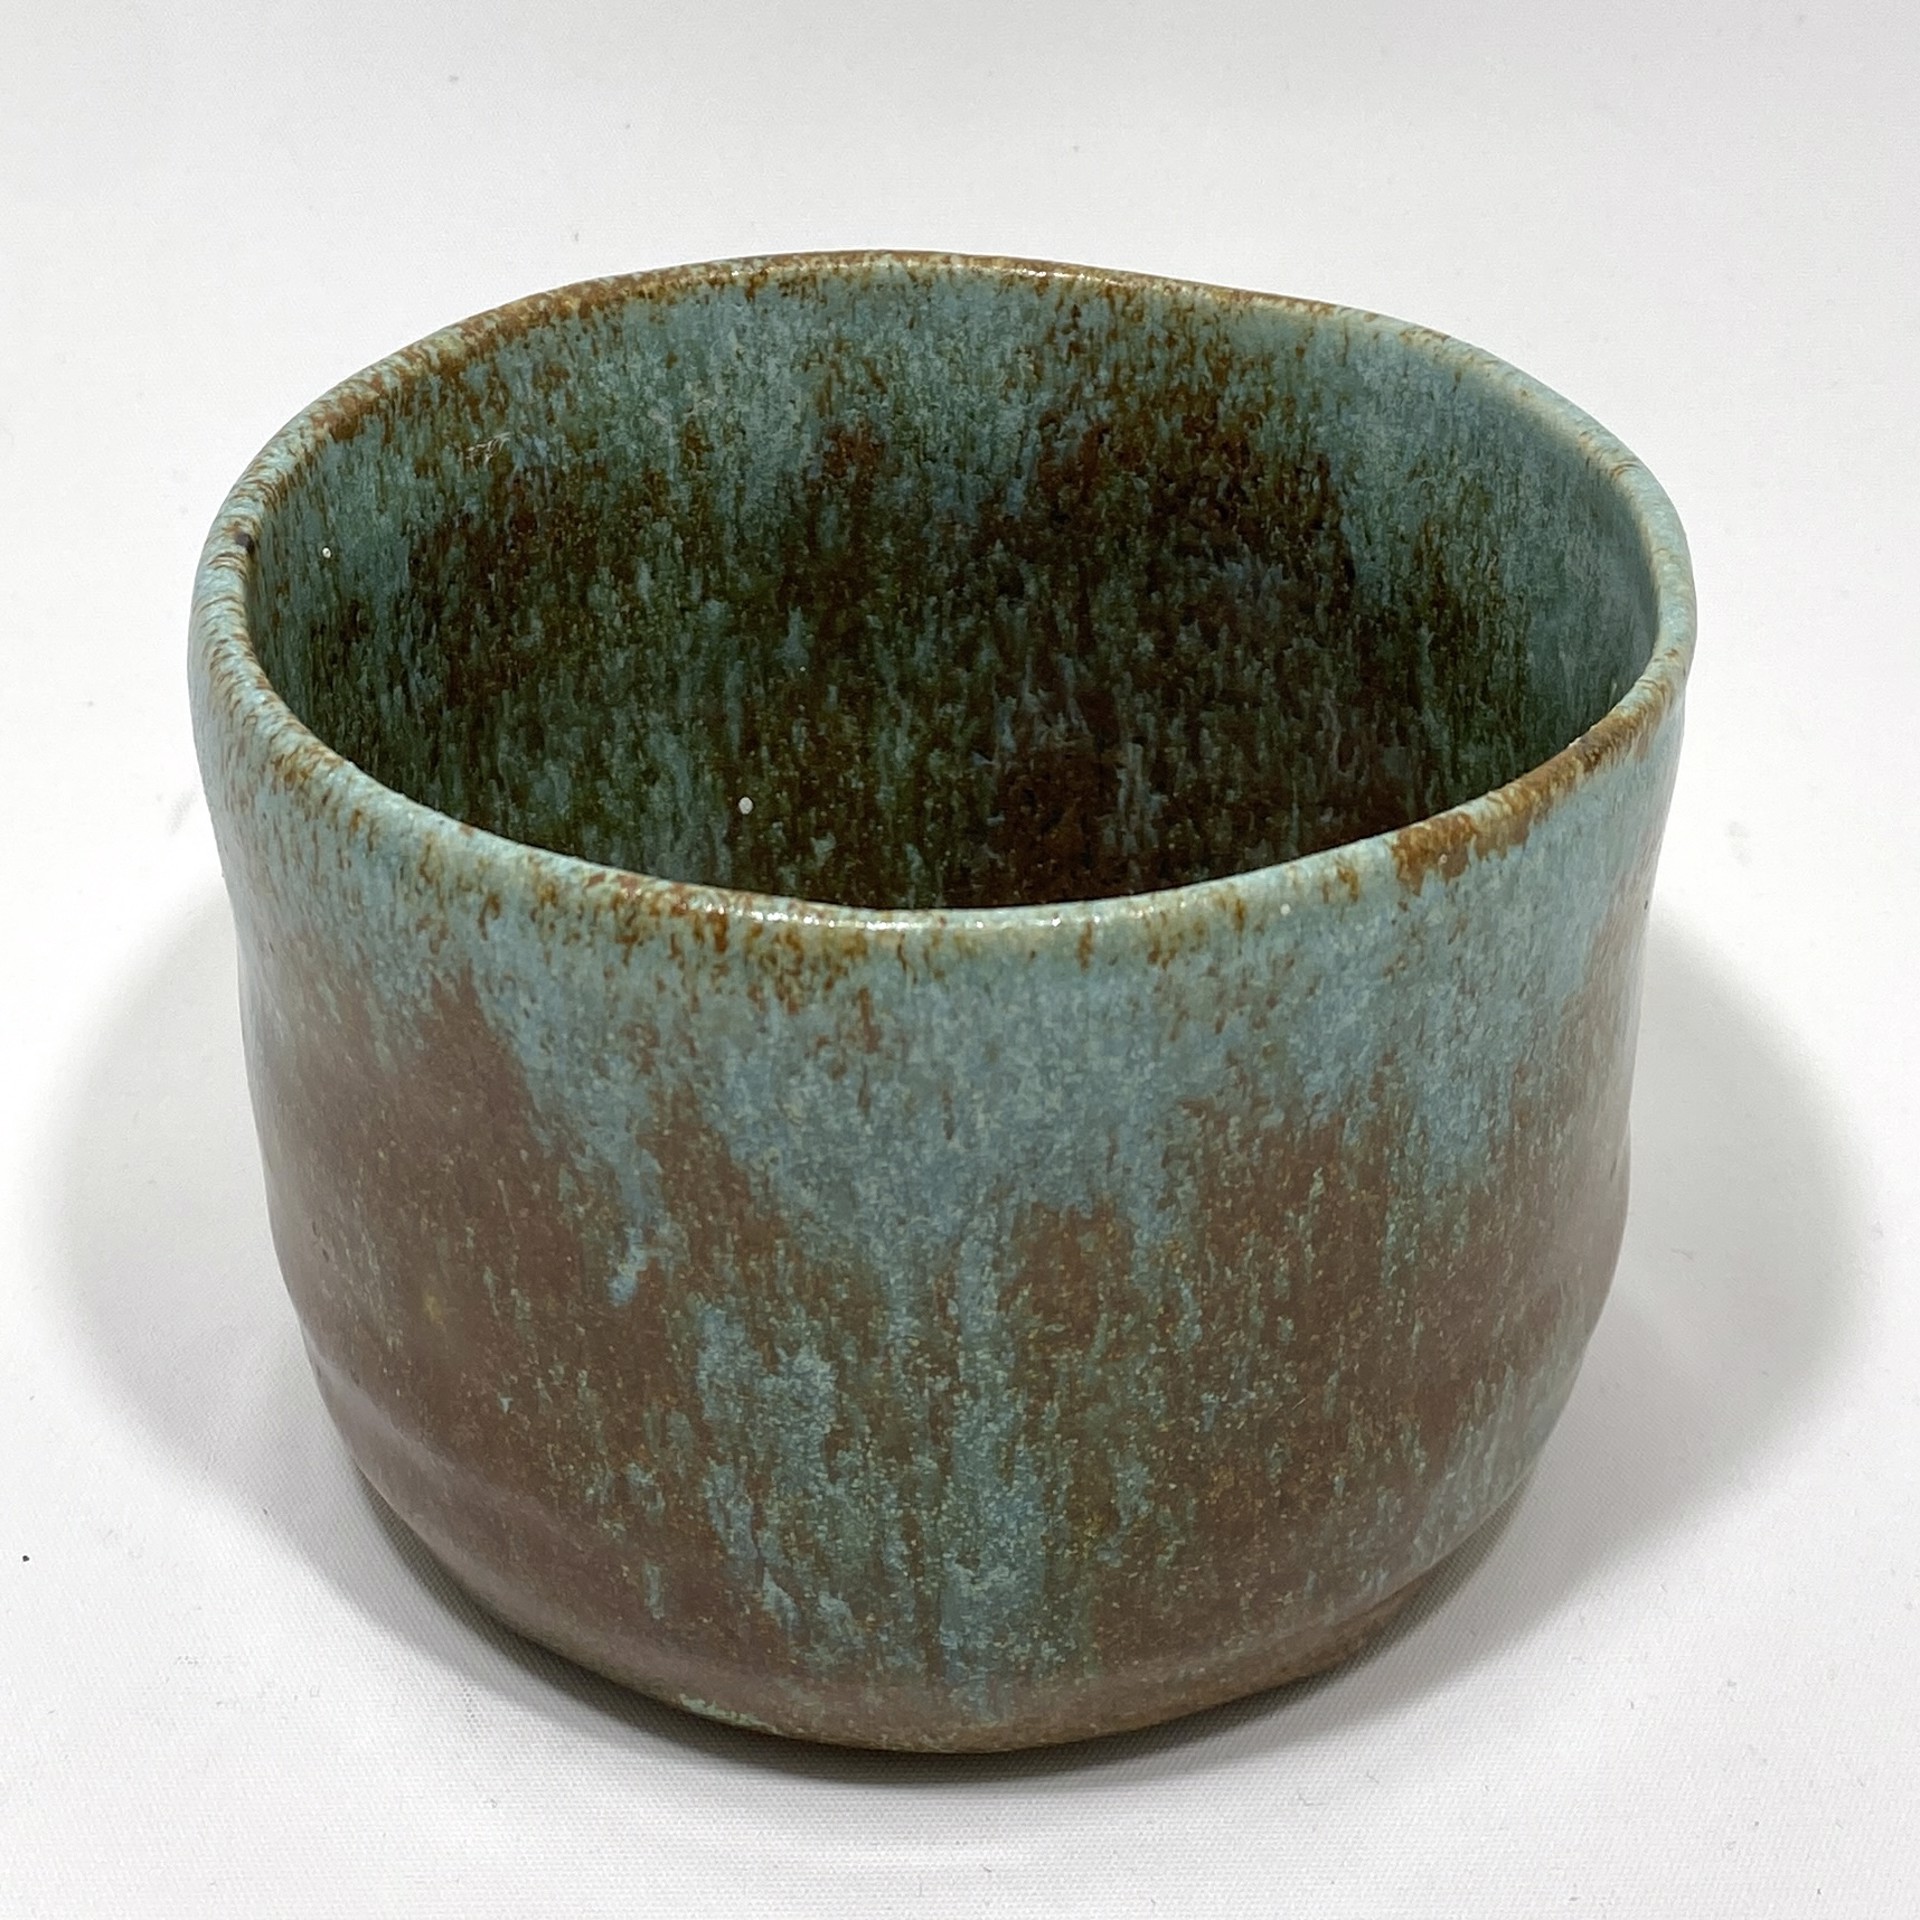 "Blue & Brown Tone Bowl" by Stephanie F. by One Step Beyond Group